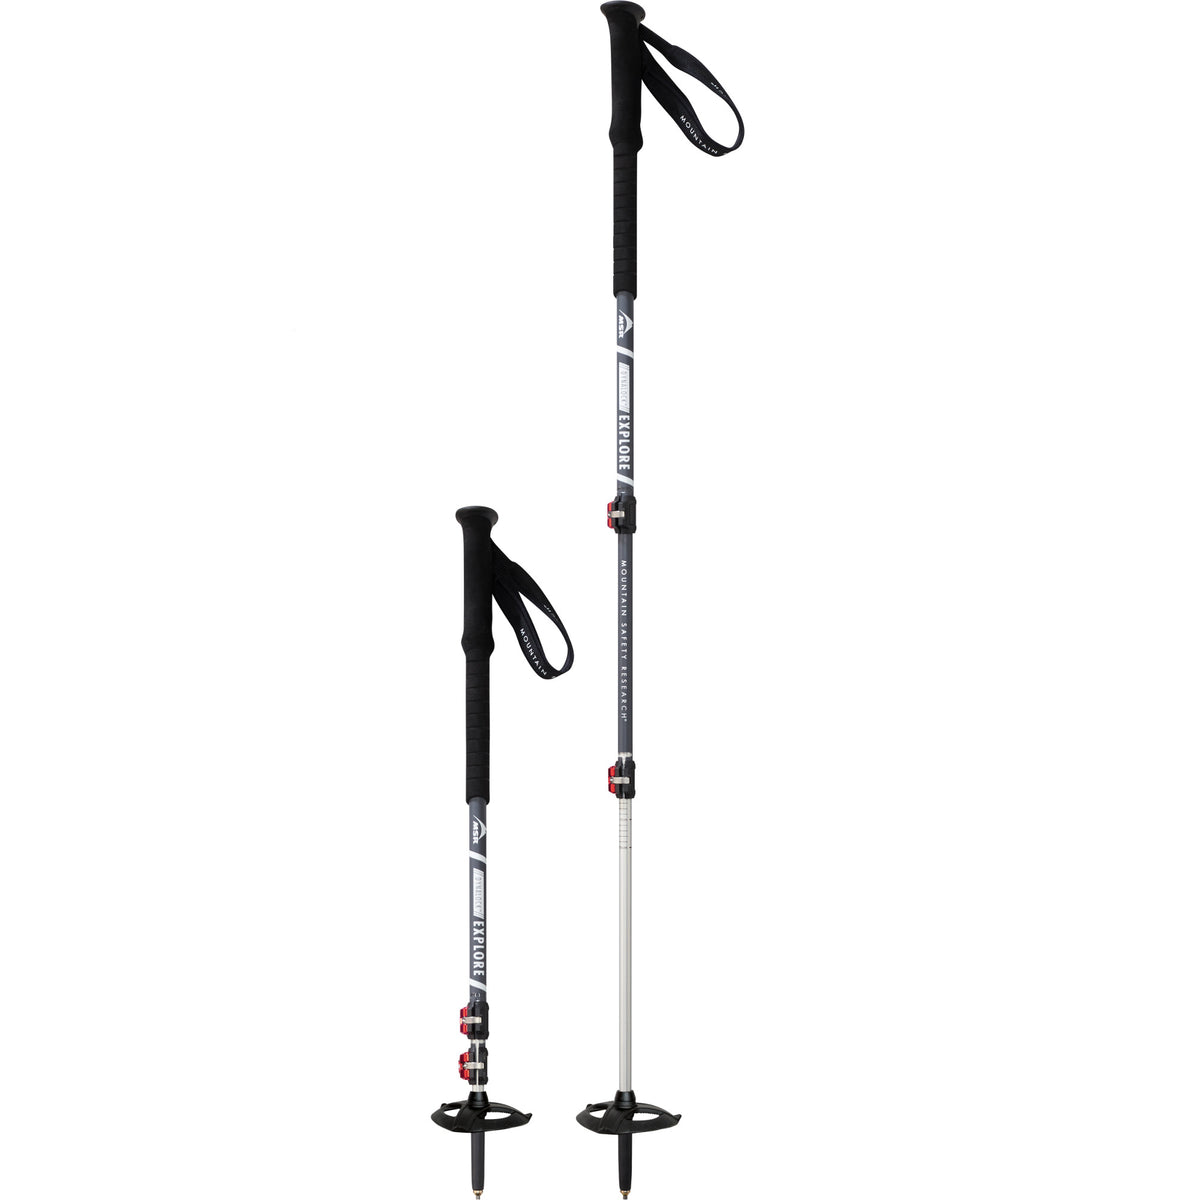 Pair of MSR Dynalock Explore trekking poles, one fully extended and one collapsed